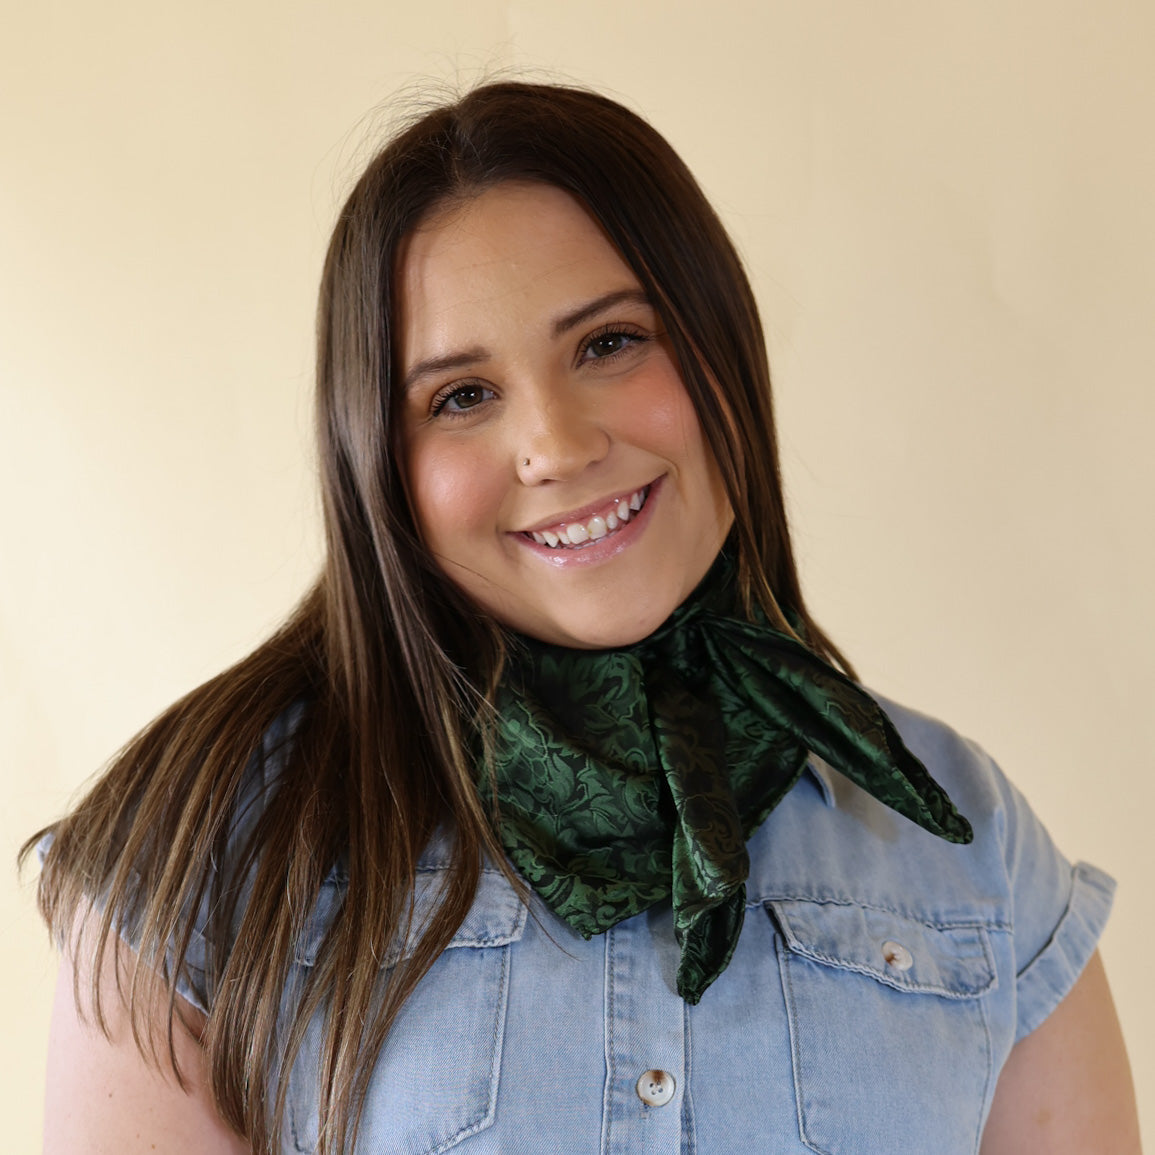 Brunette model is pictured wearing a denim button up top and a fern green, baroque printed scarf tied around her neck. She is pictured in front of a beige background. 